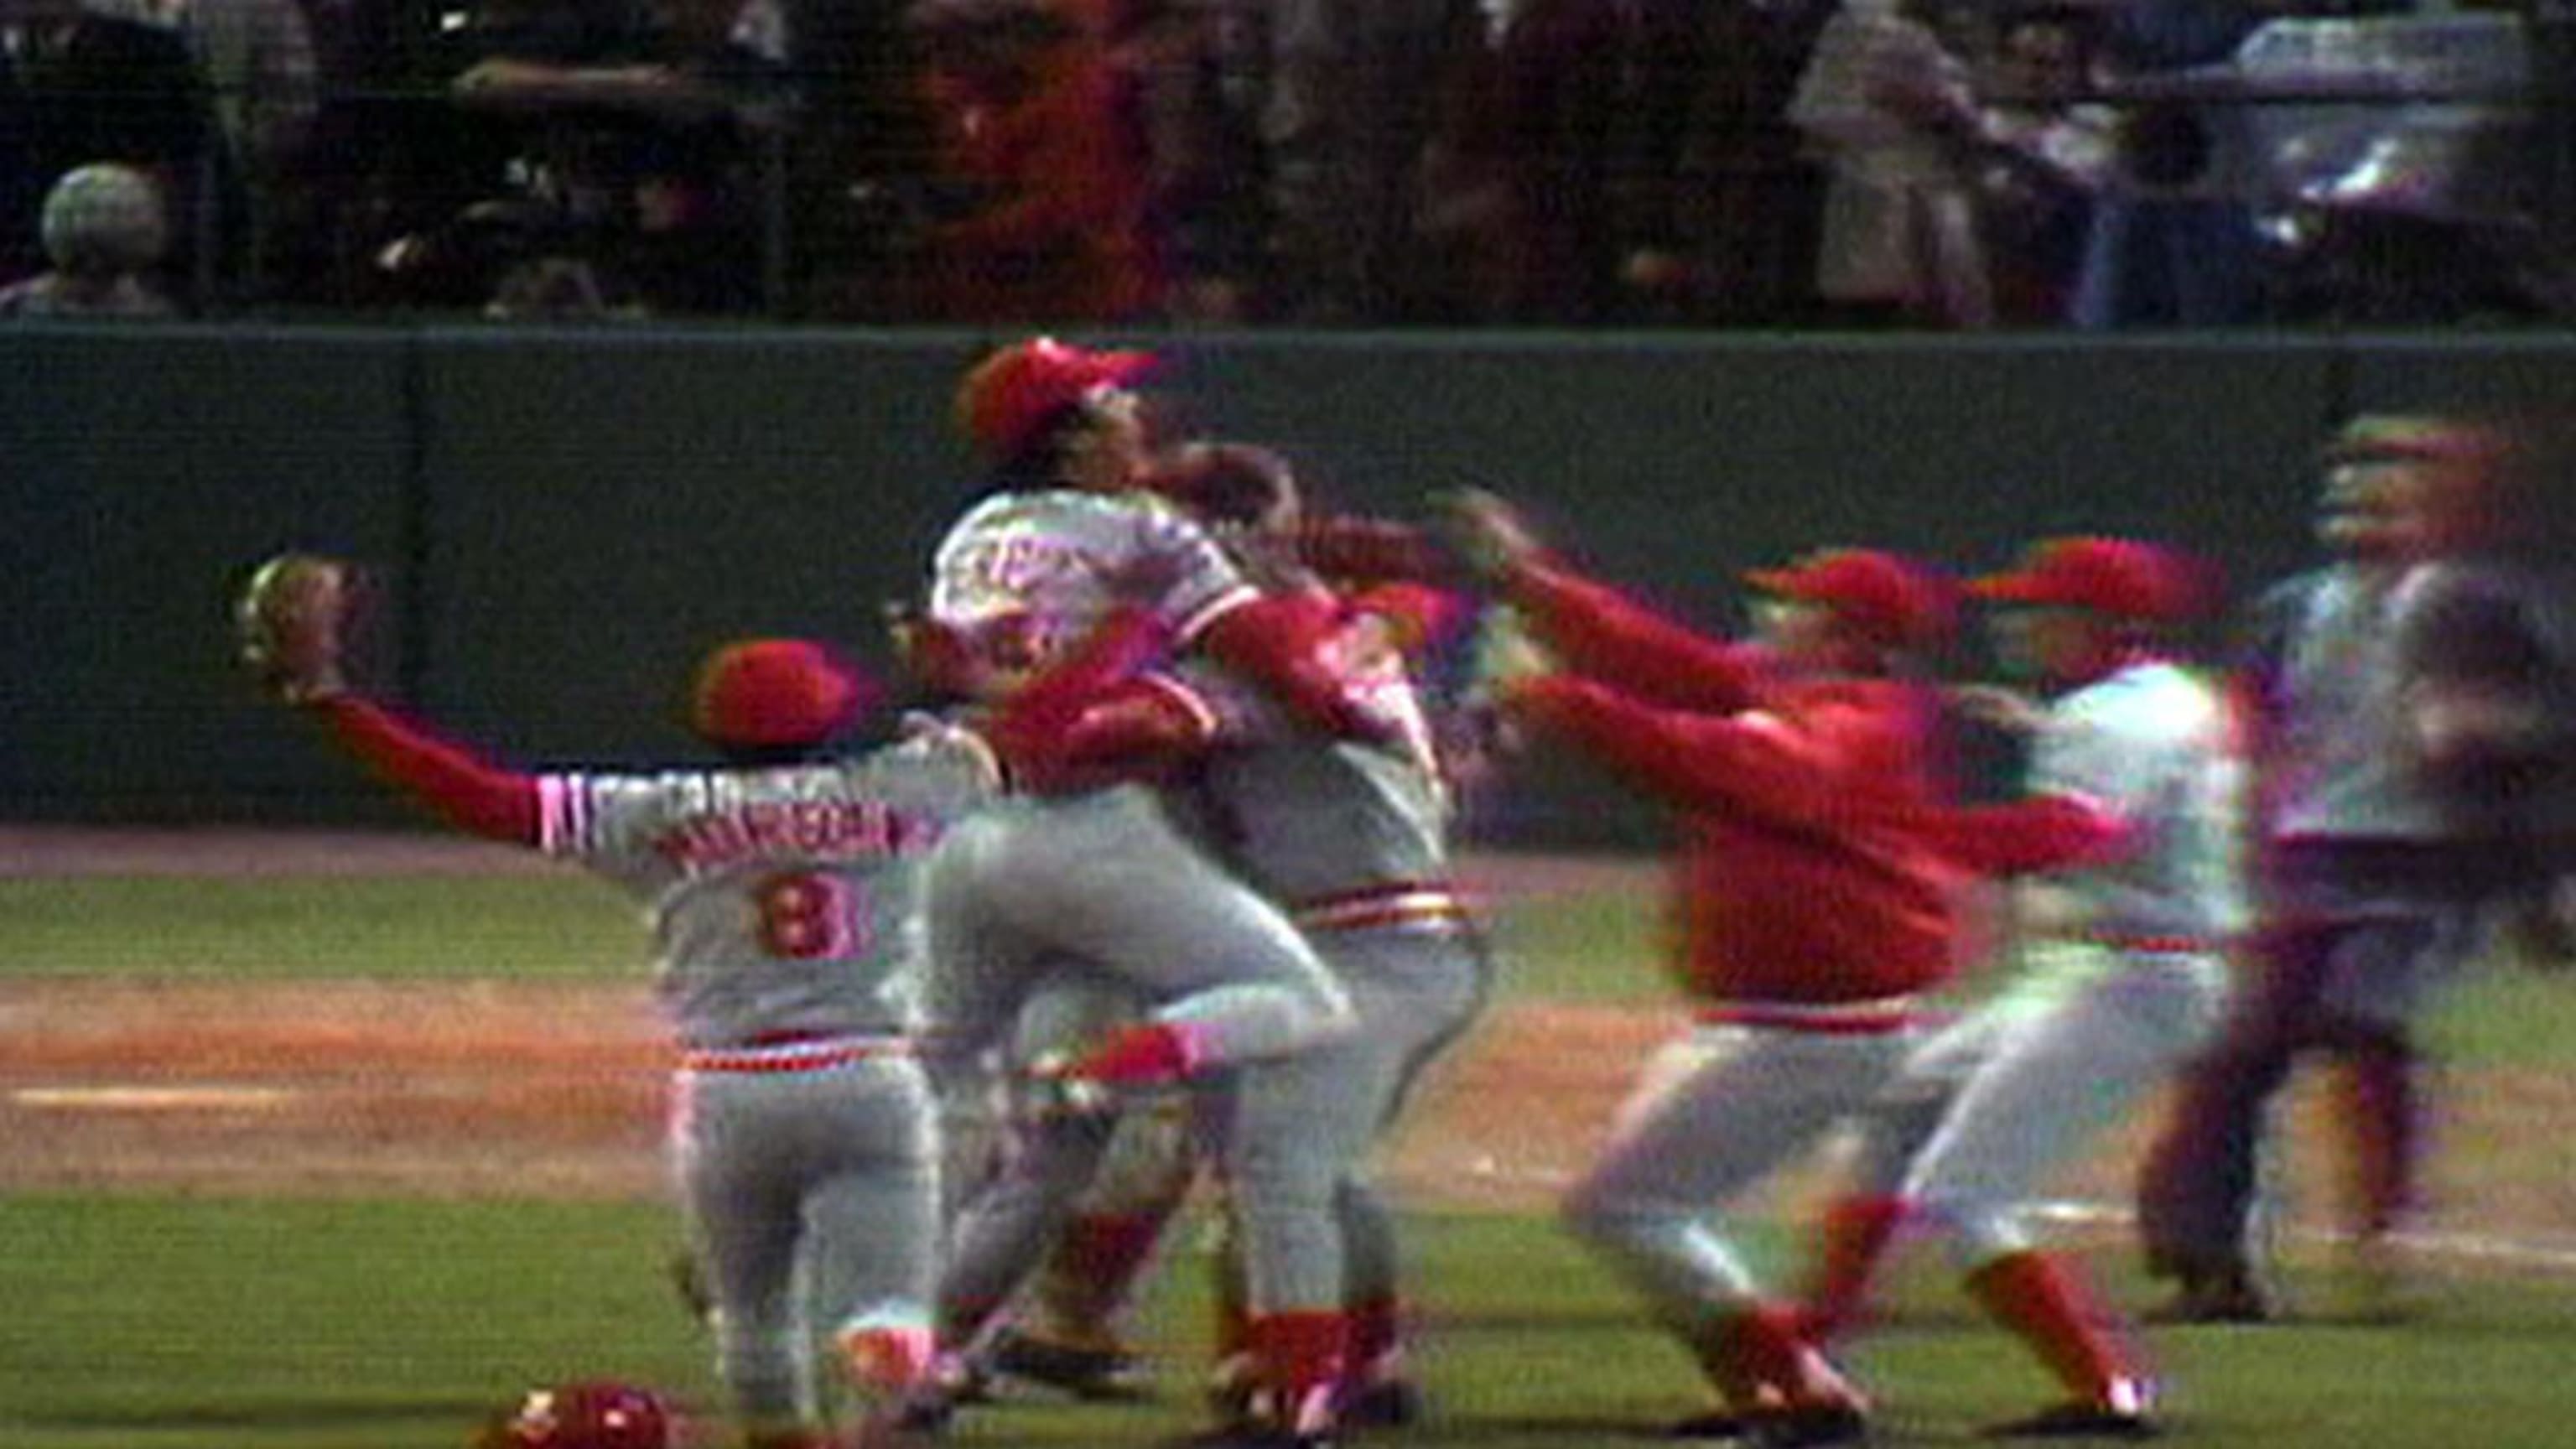 St. Louis Cardinals Take Game 7, Win 11th World Series In Franchise History  